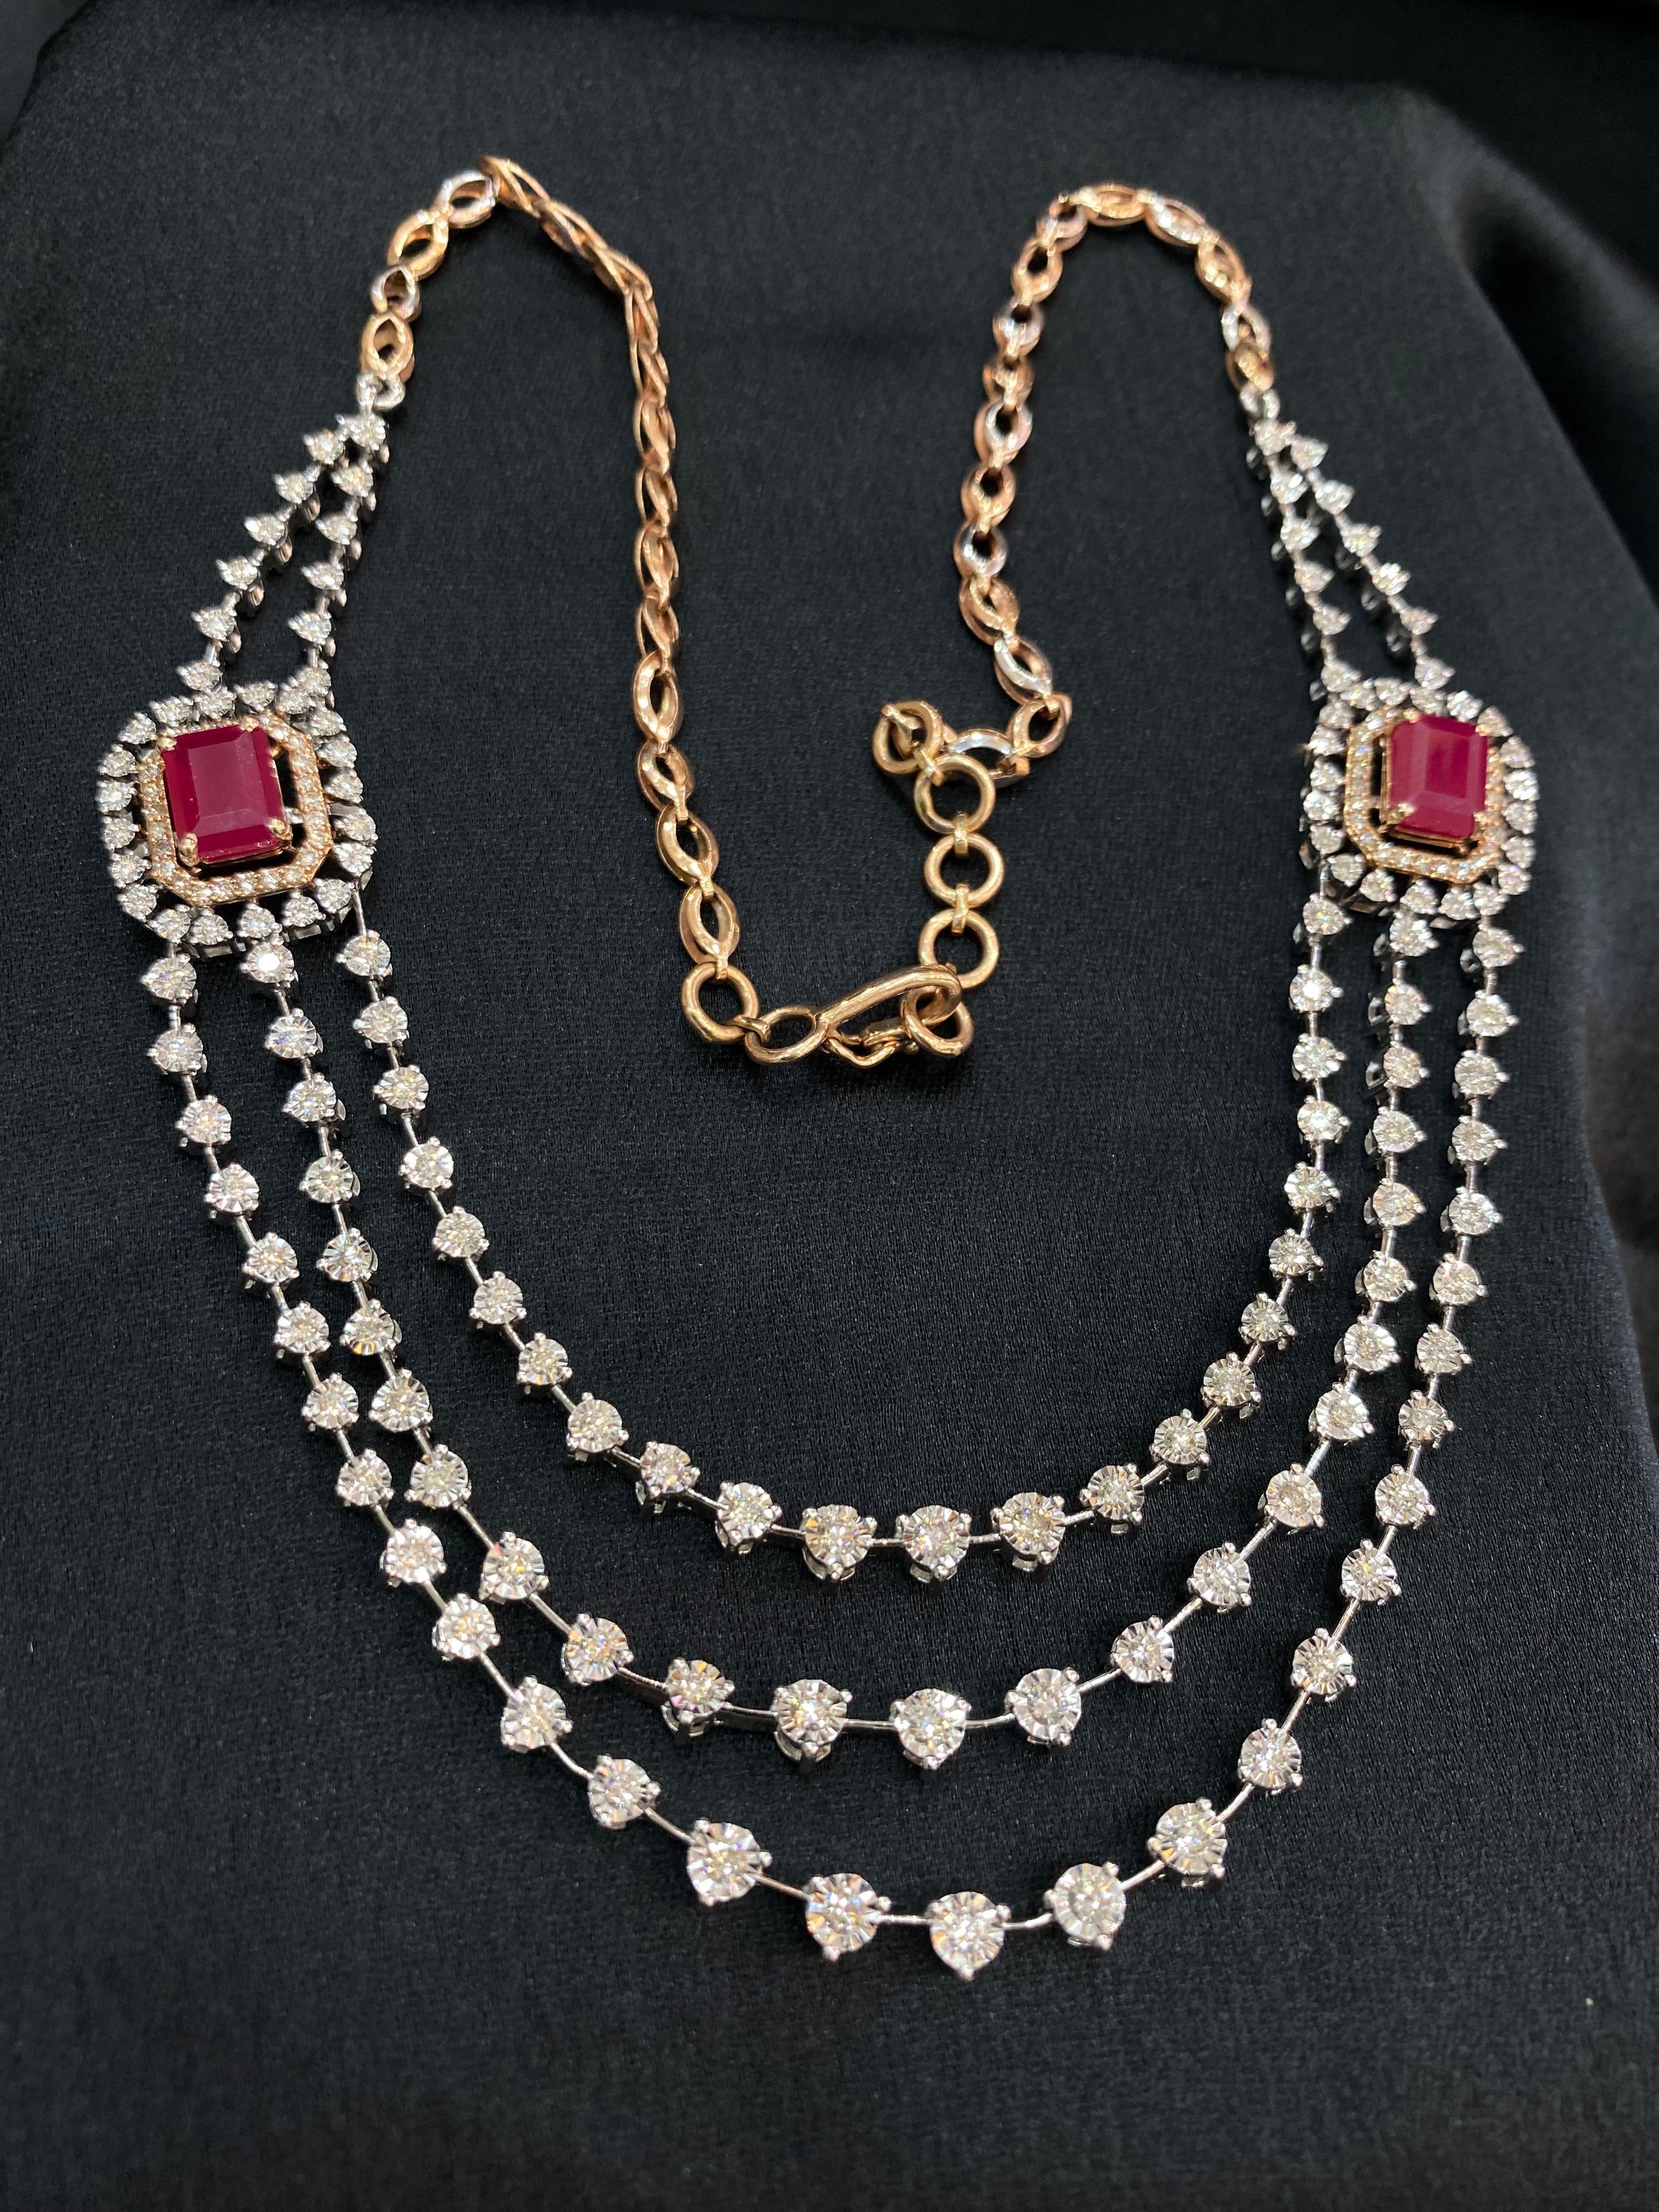 Contemporary Stunning 6.89 Cts F-VS1 Round Brilliant Diamonds Ruby 3-Strand Necklace 14K Gold For Sale